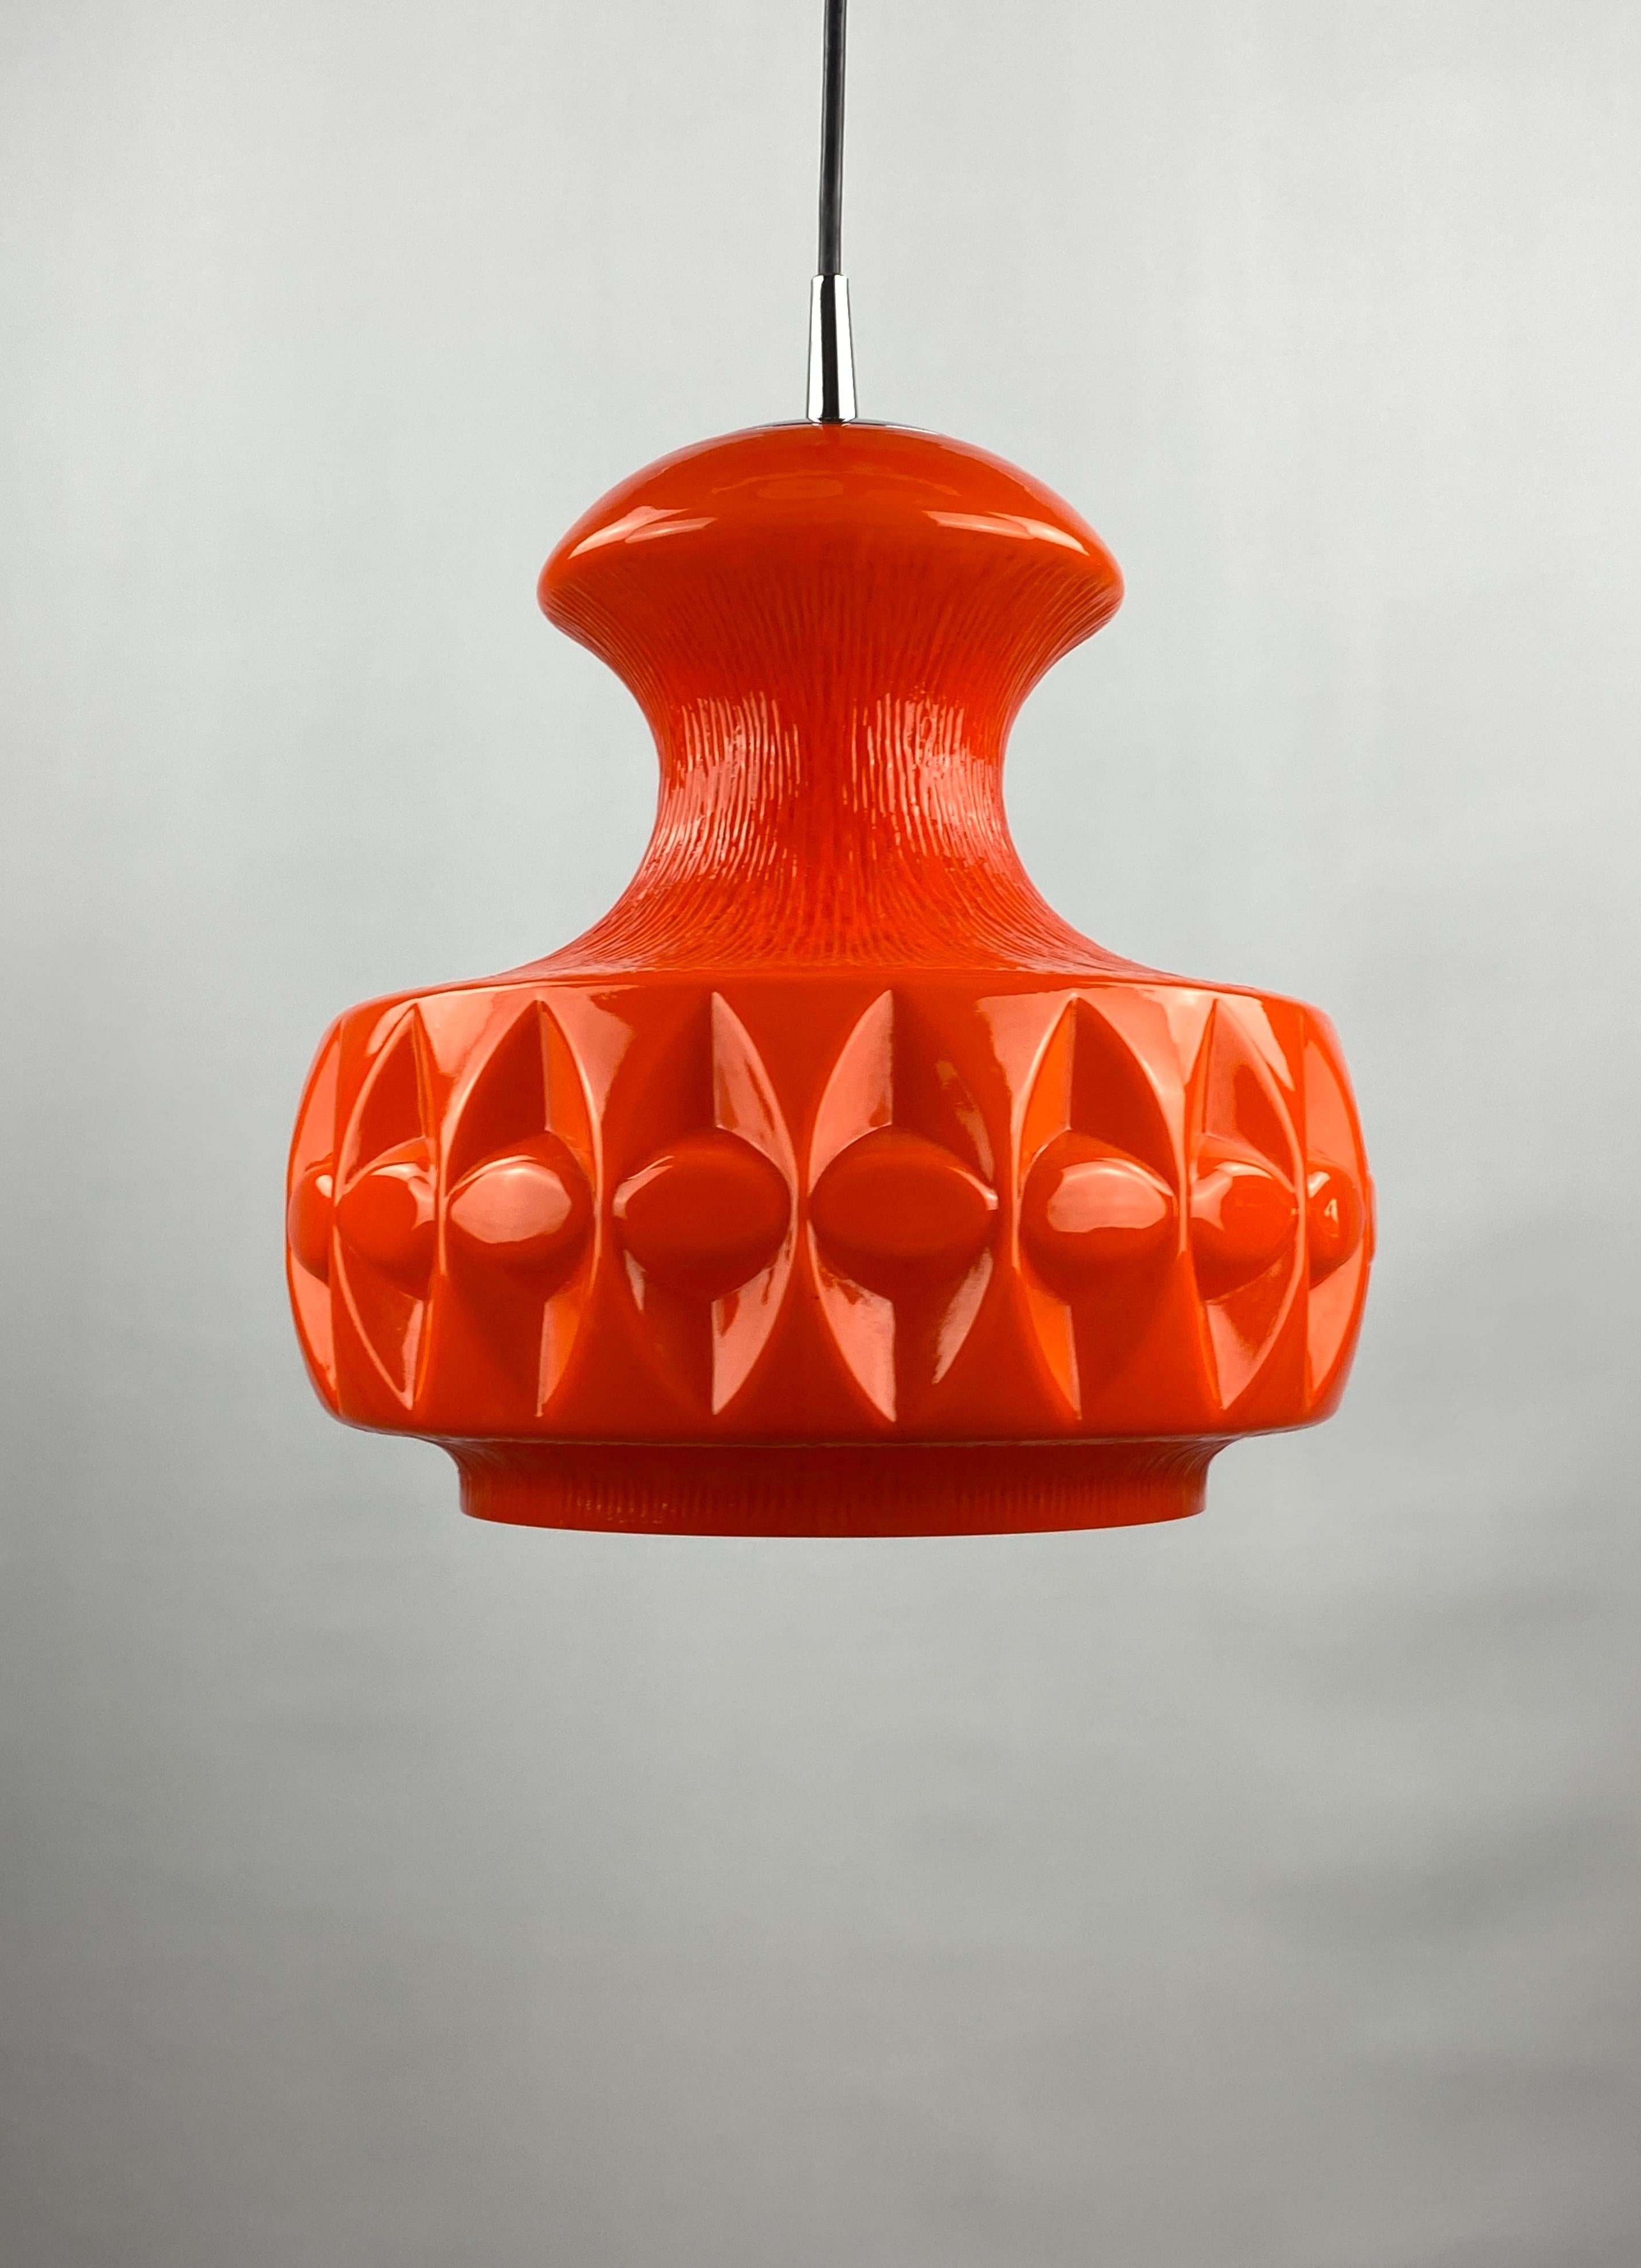 Uncommonly shaped orange glass pendant light by Peill and Putzler, produced around 1960 in Germany. Has a nice bright orange color and gives a very warm light.

Typical design of the German makers, also resembles the Swedish designs. More colored